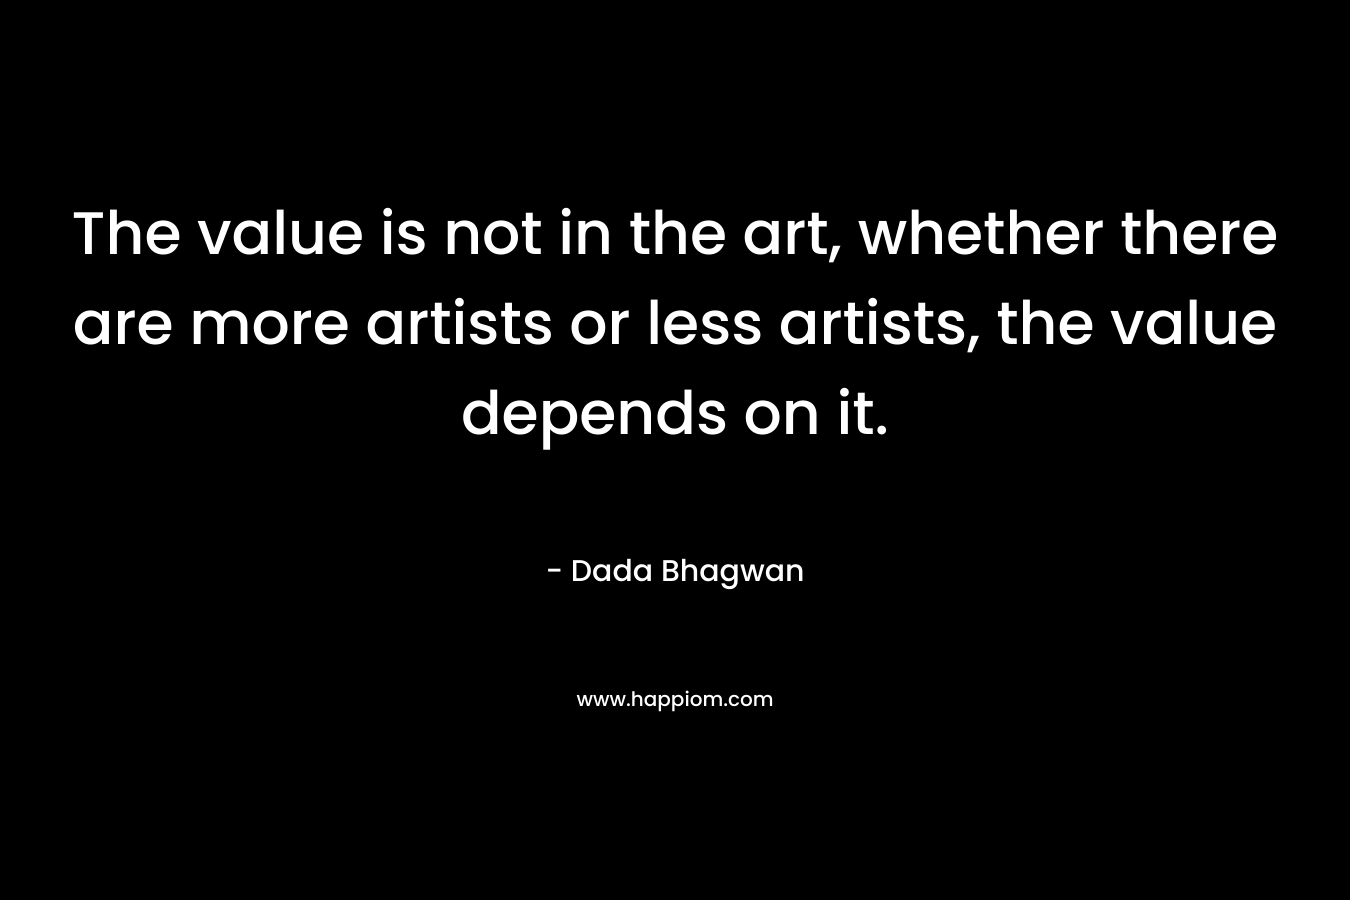 The value is not in the art, whether there are more artists or less artists, the value depends on it.